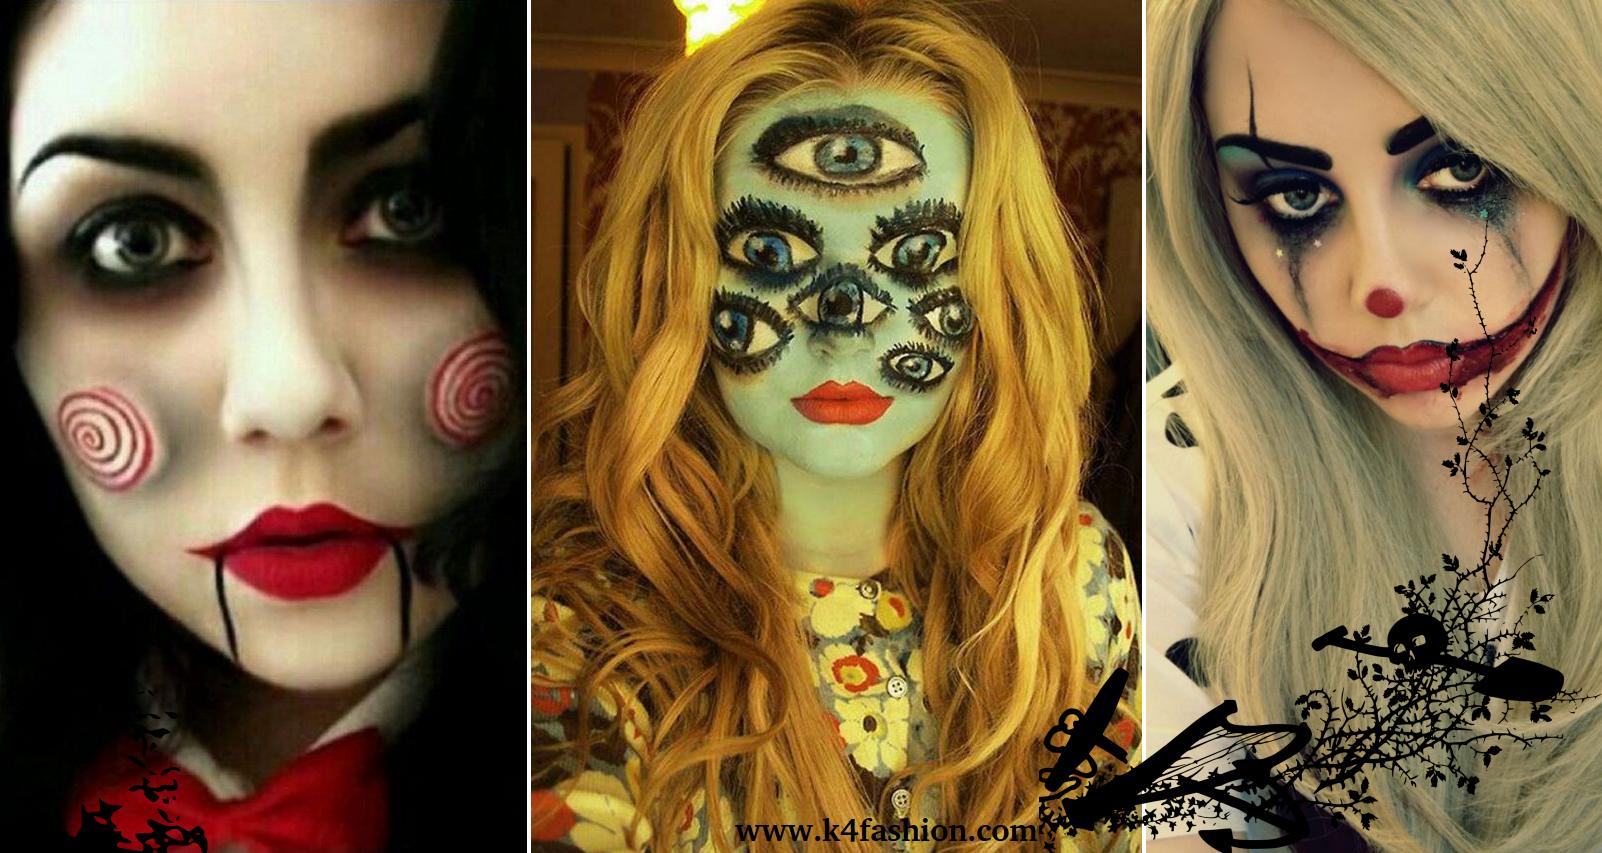 25 and Scary Halloween Makeup Ideas to Try This Year - K4 Fashion